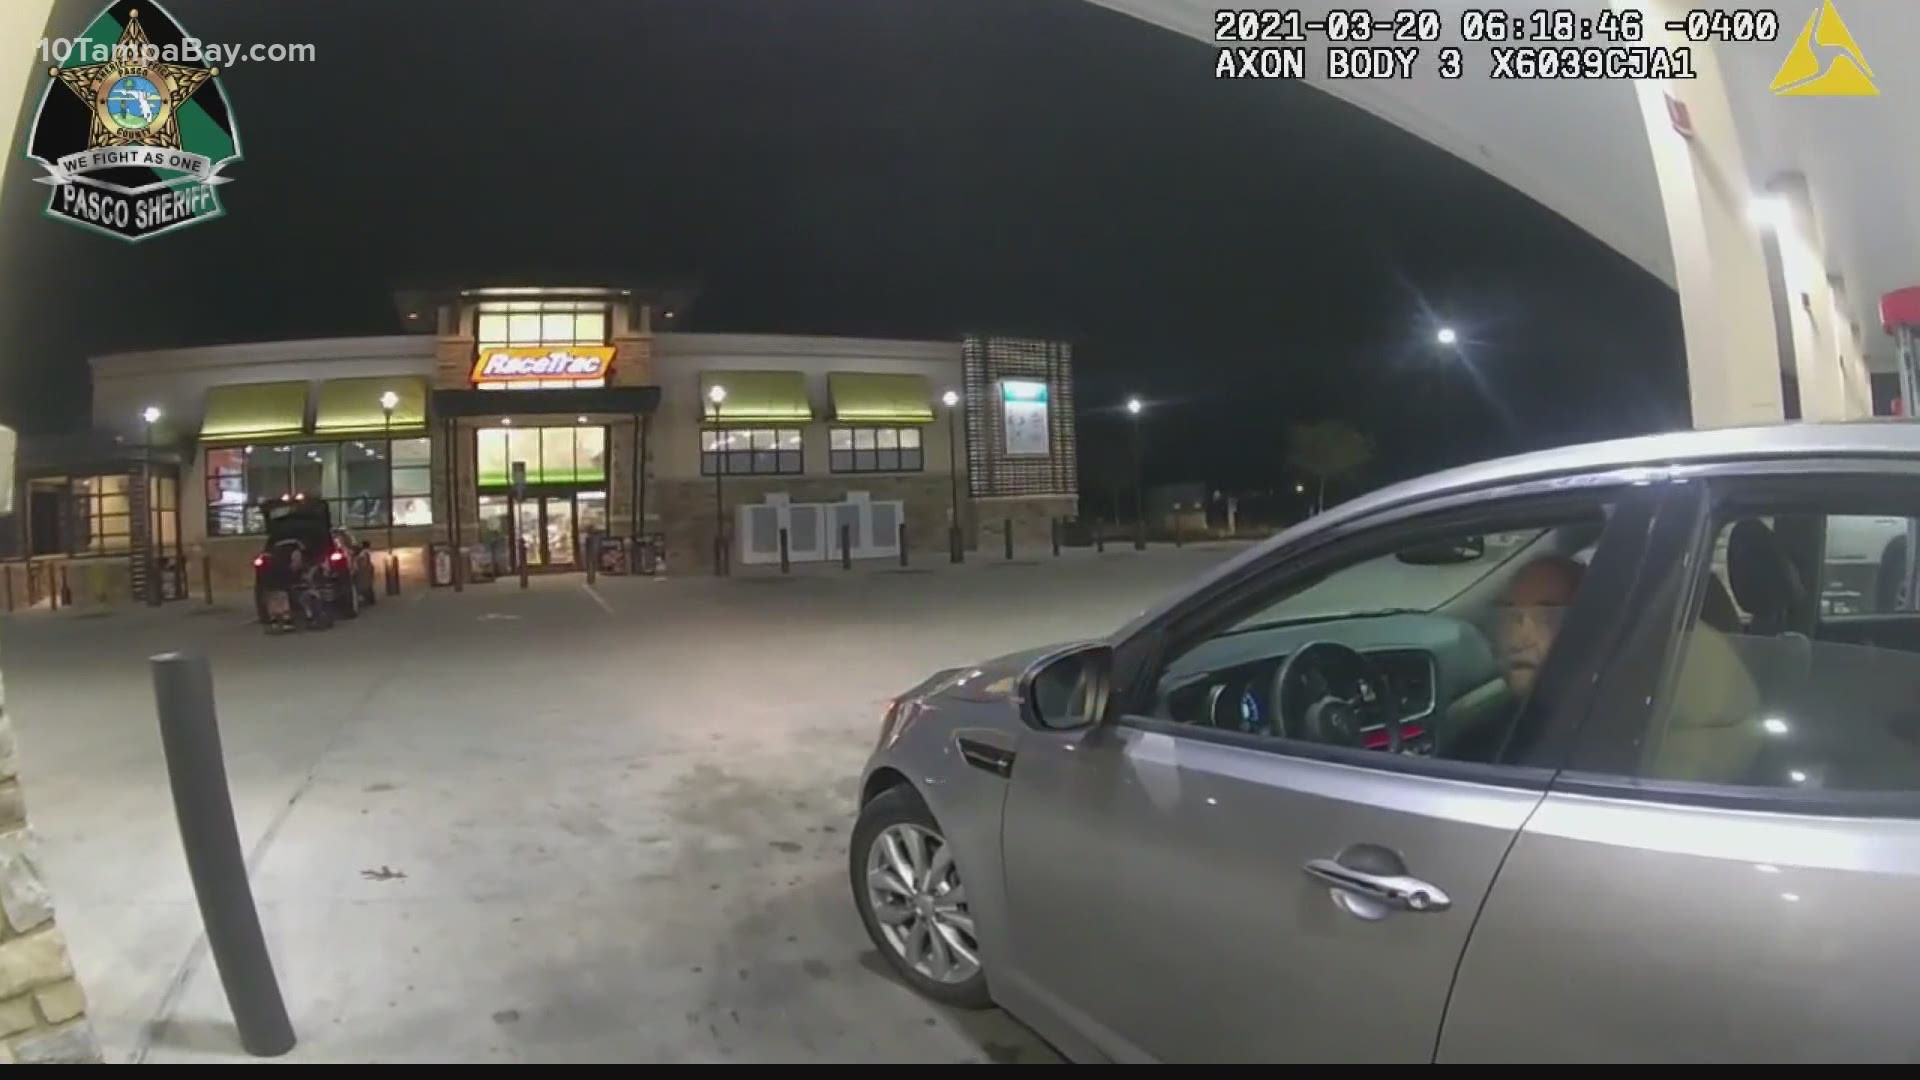 An investigation is ongoing at the RaceTrac gas station in Hudson.